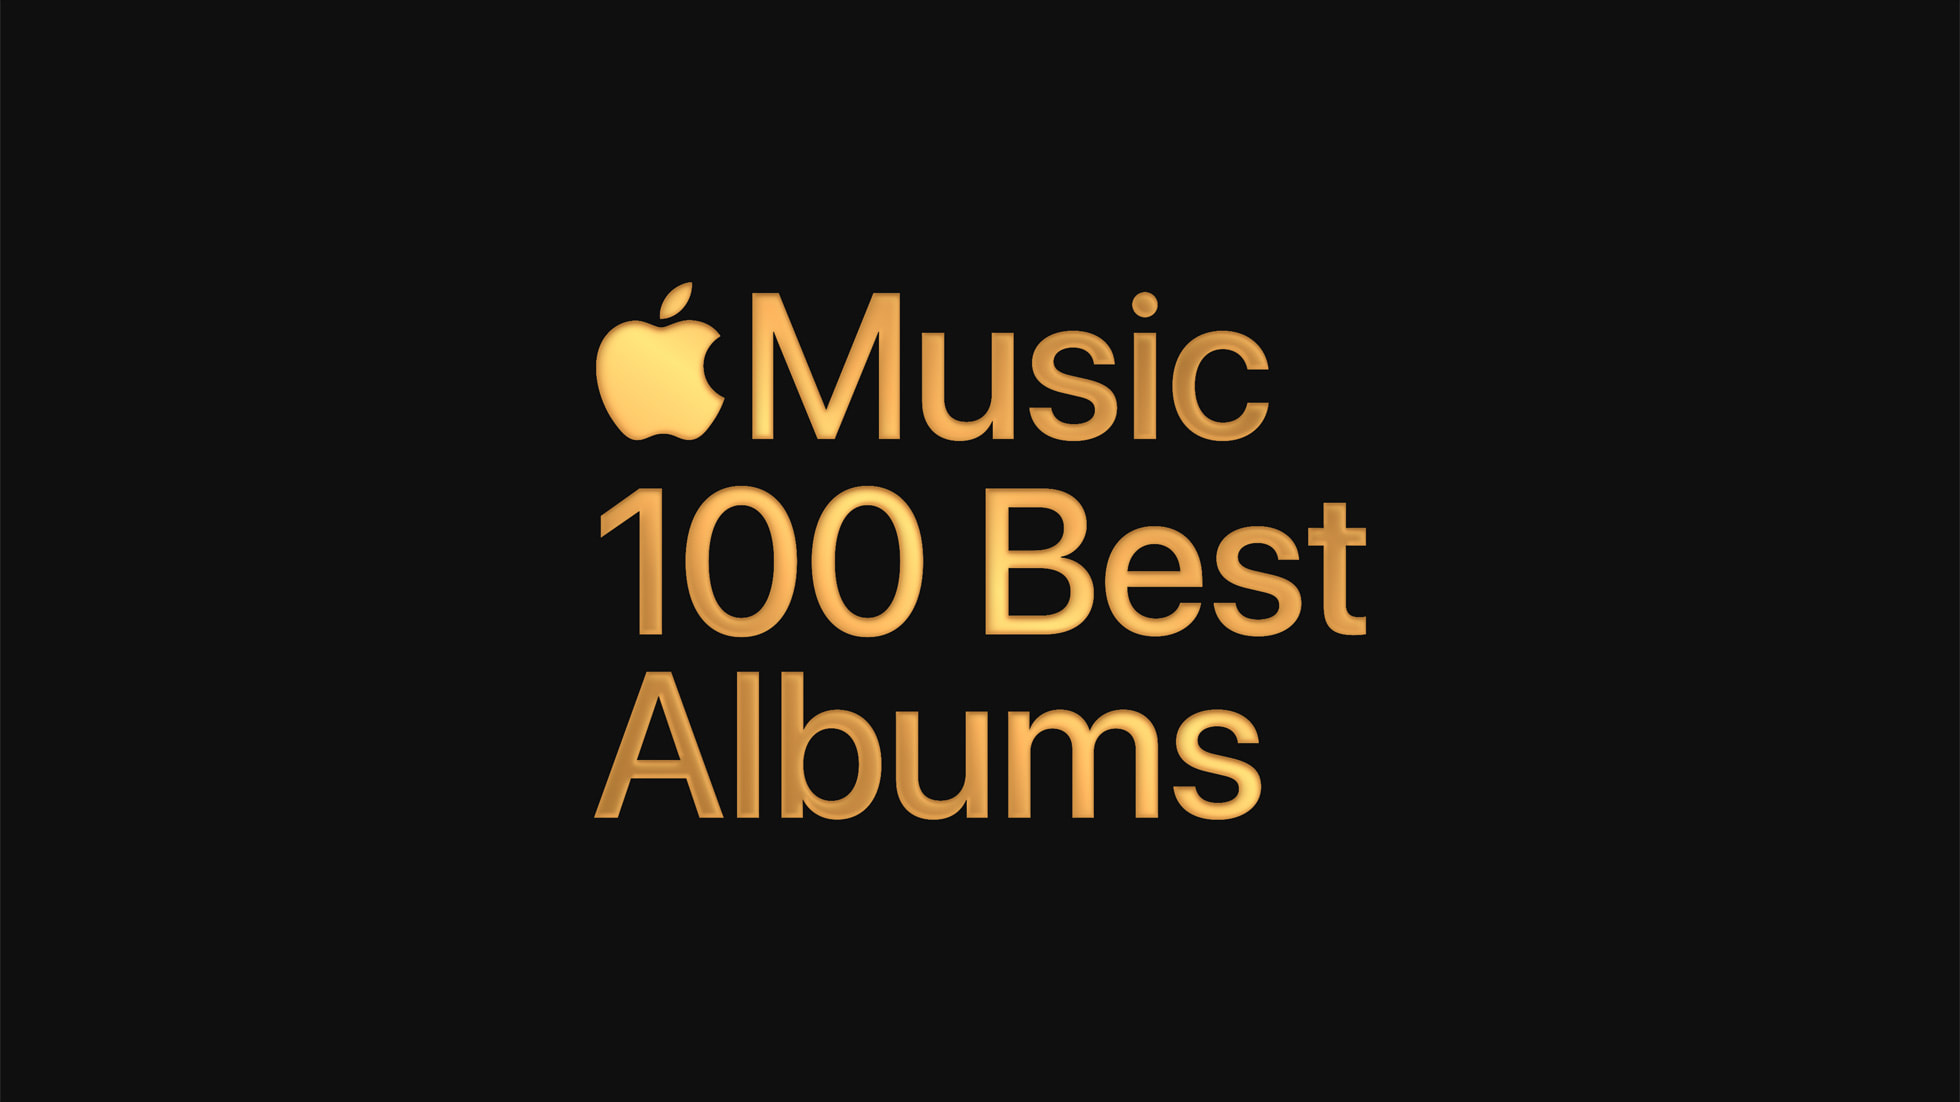 Apple Music celebrates the greatest music albums of all time with the release of its first-ever Top 100 Albums list.